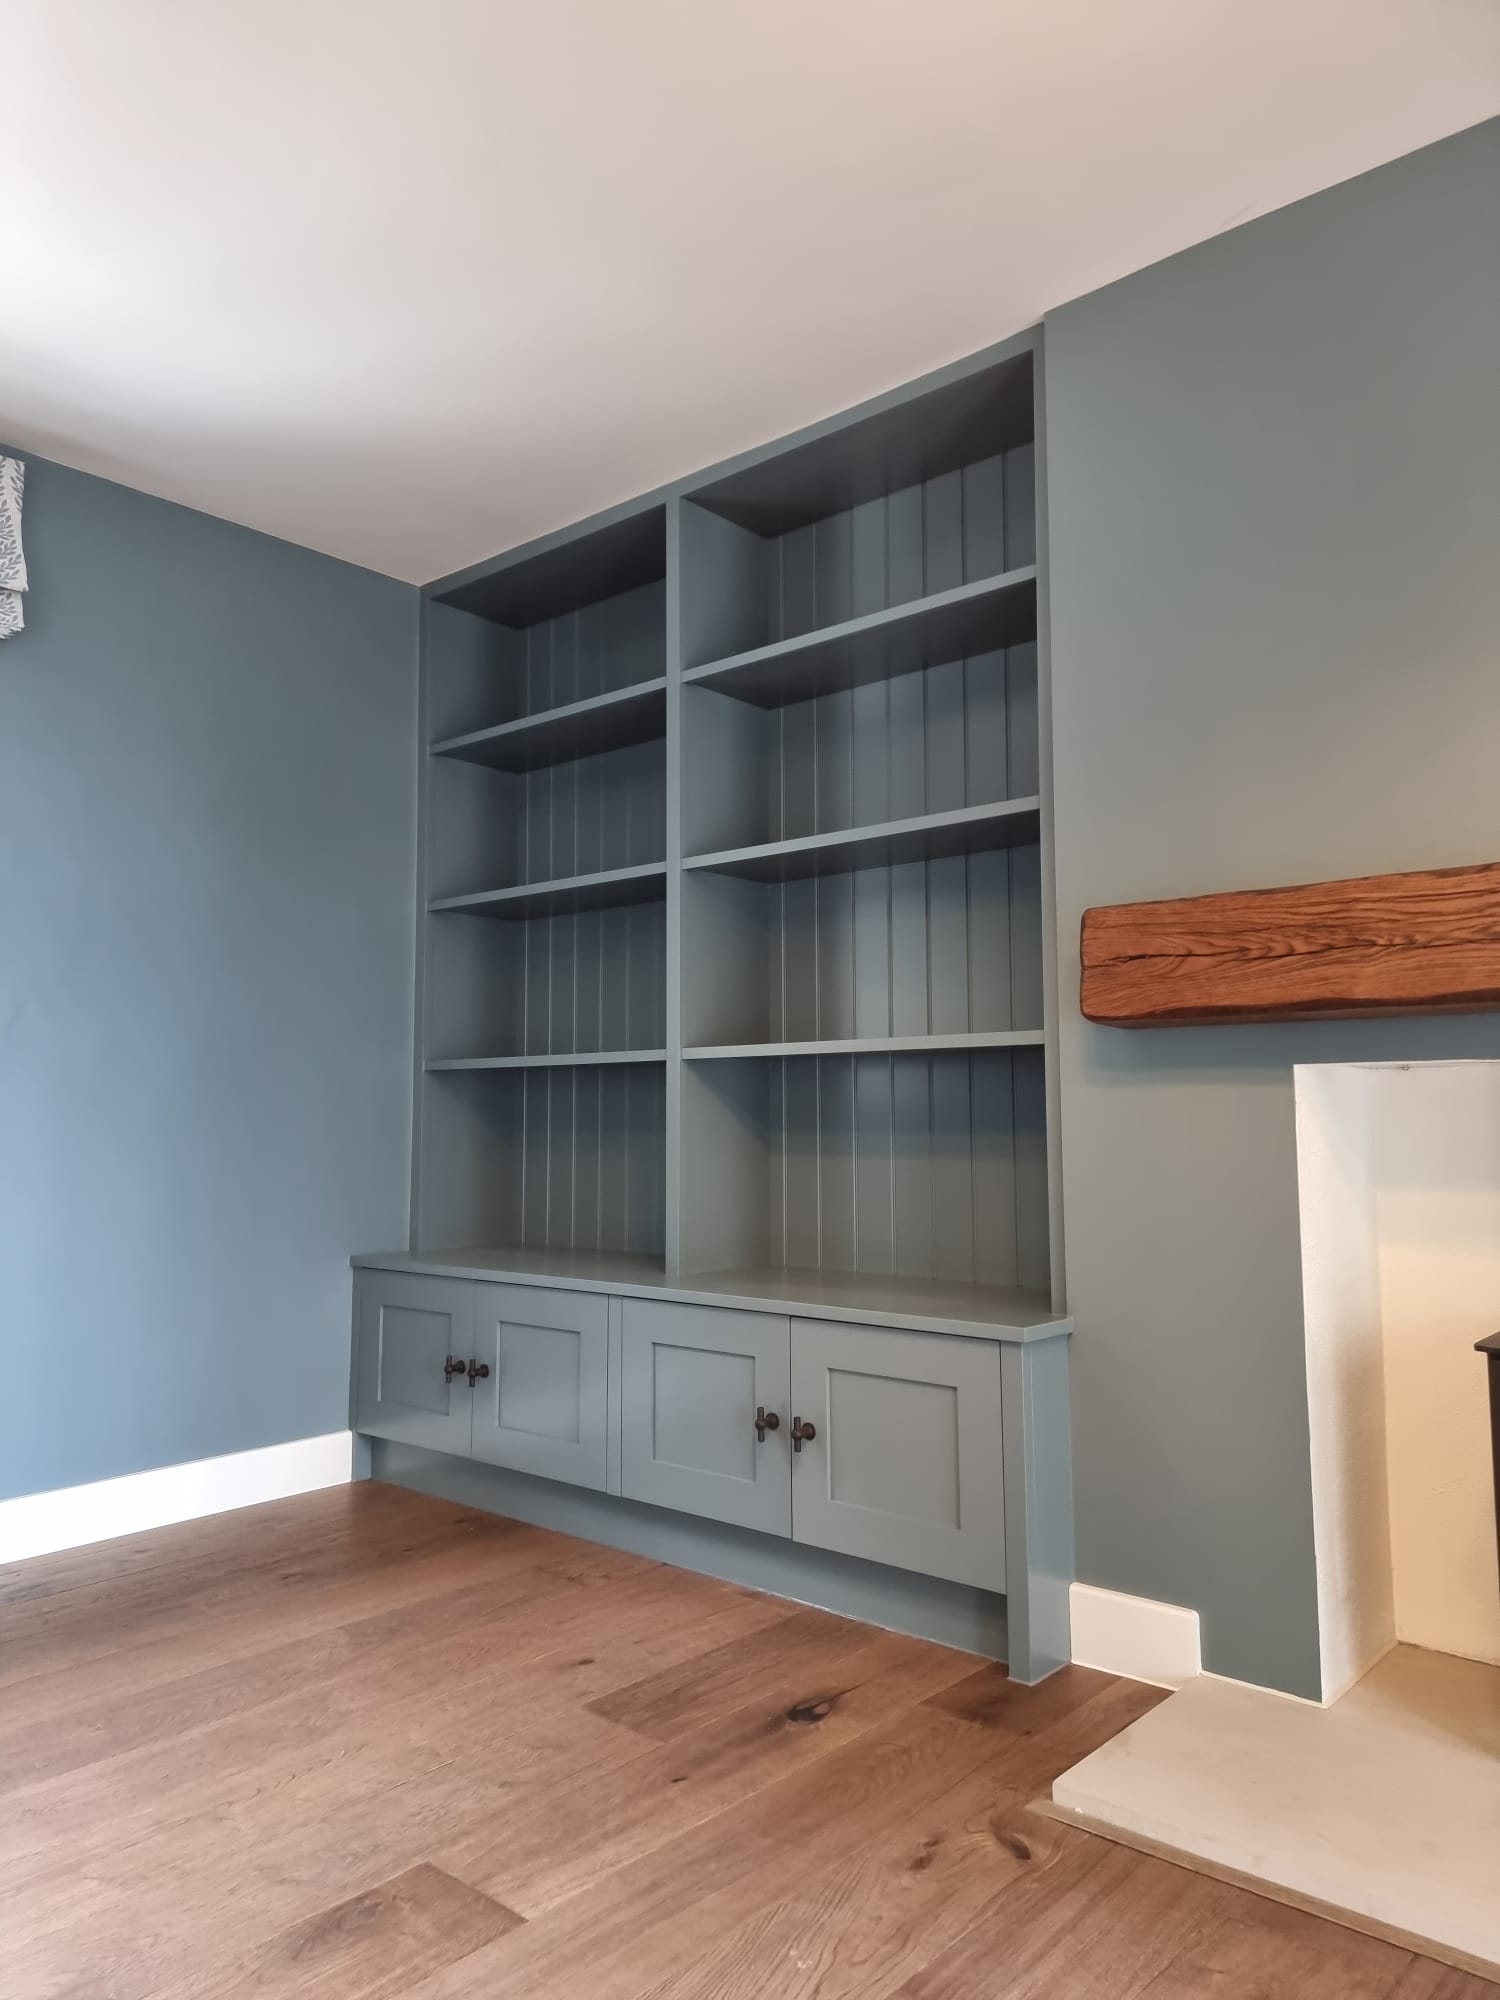 Bespoke timber bookcase by Kings Stag Joinery